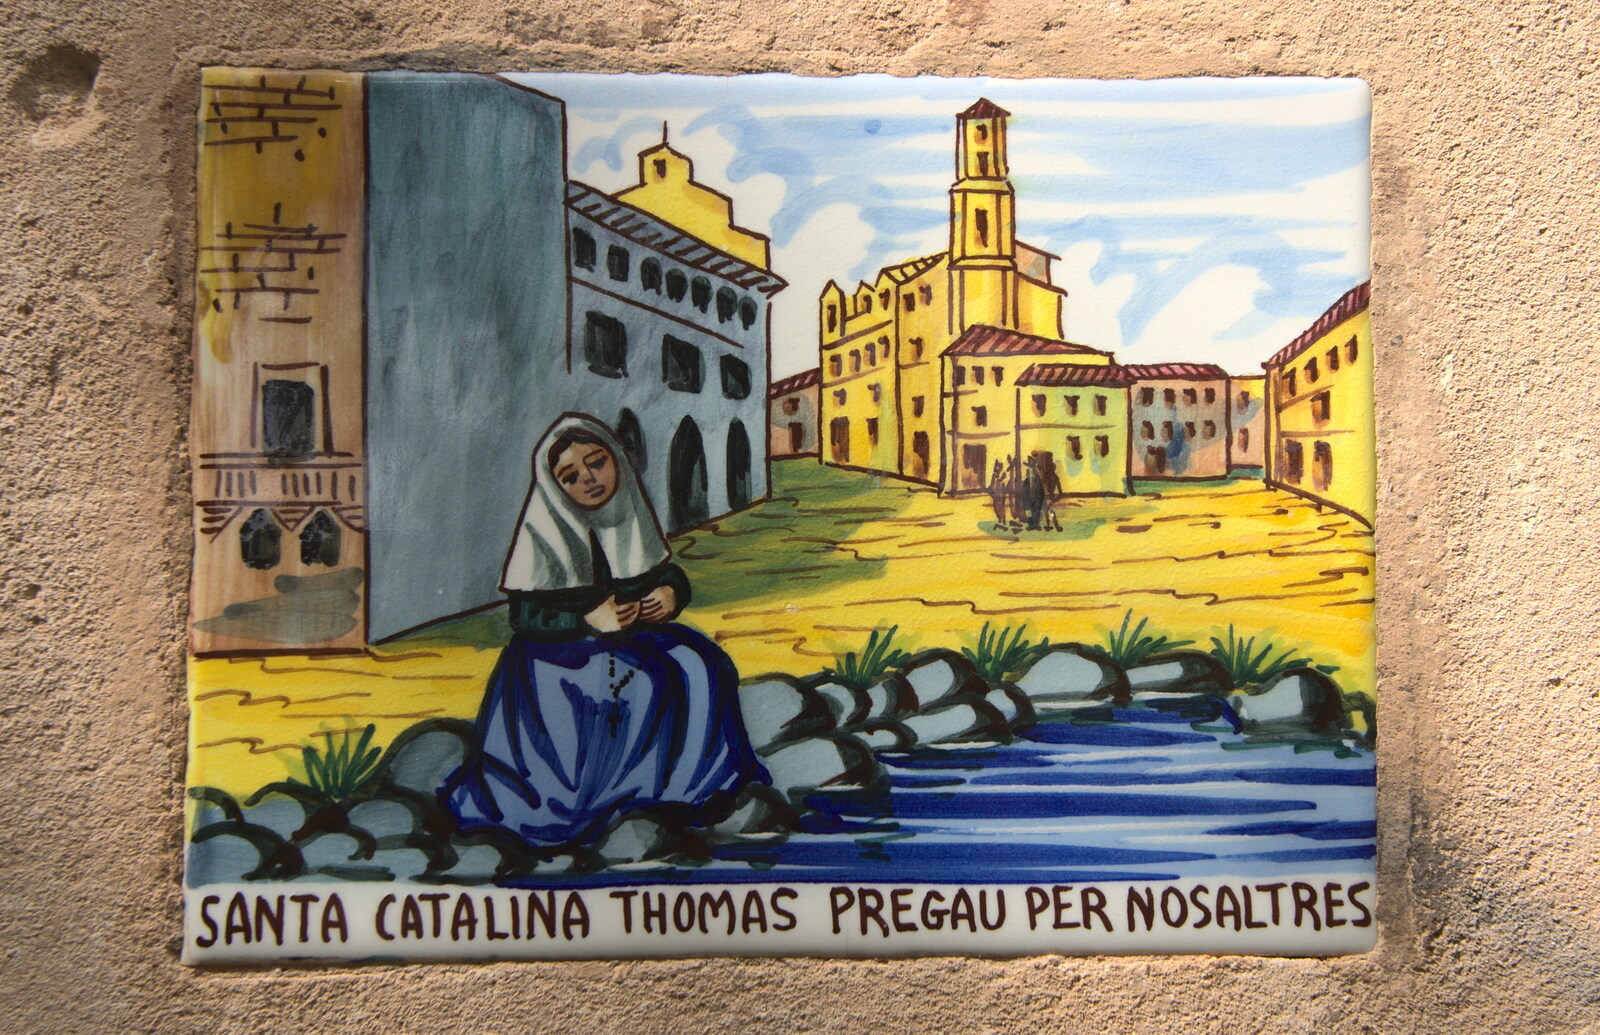 A tile painting of Santa Catalina Thomas from A Few Hours in Valdemossa, Mallorca, Spain - 13th September 2012